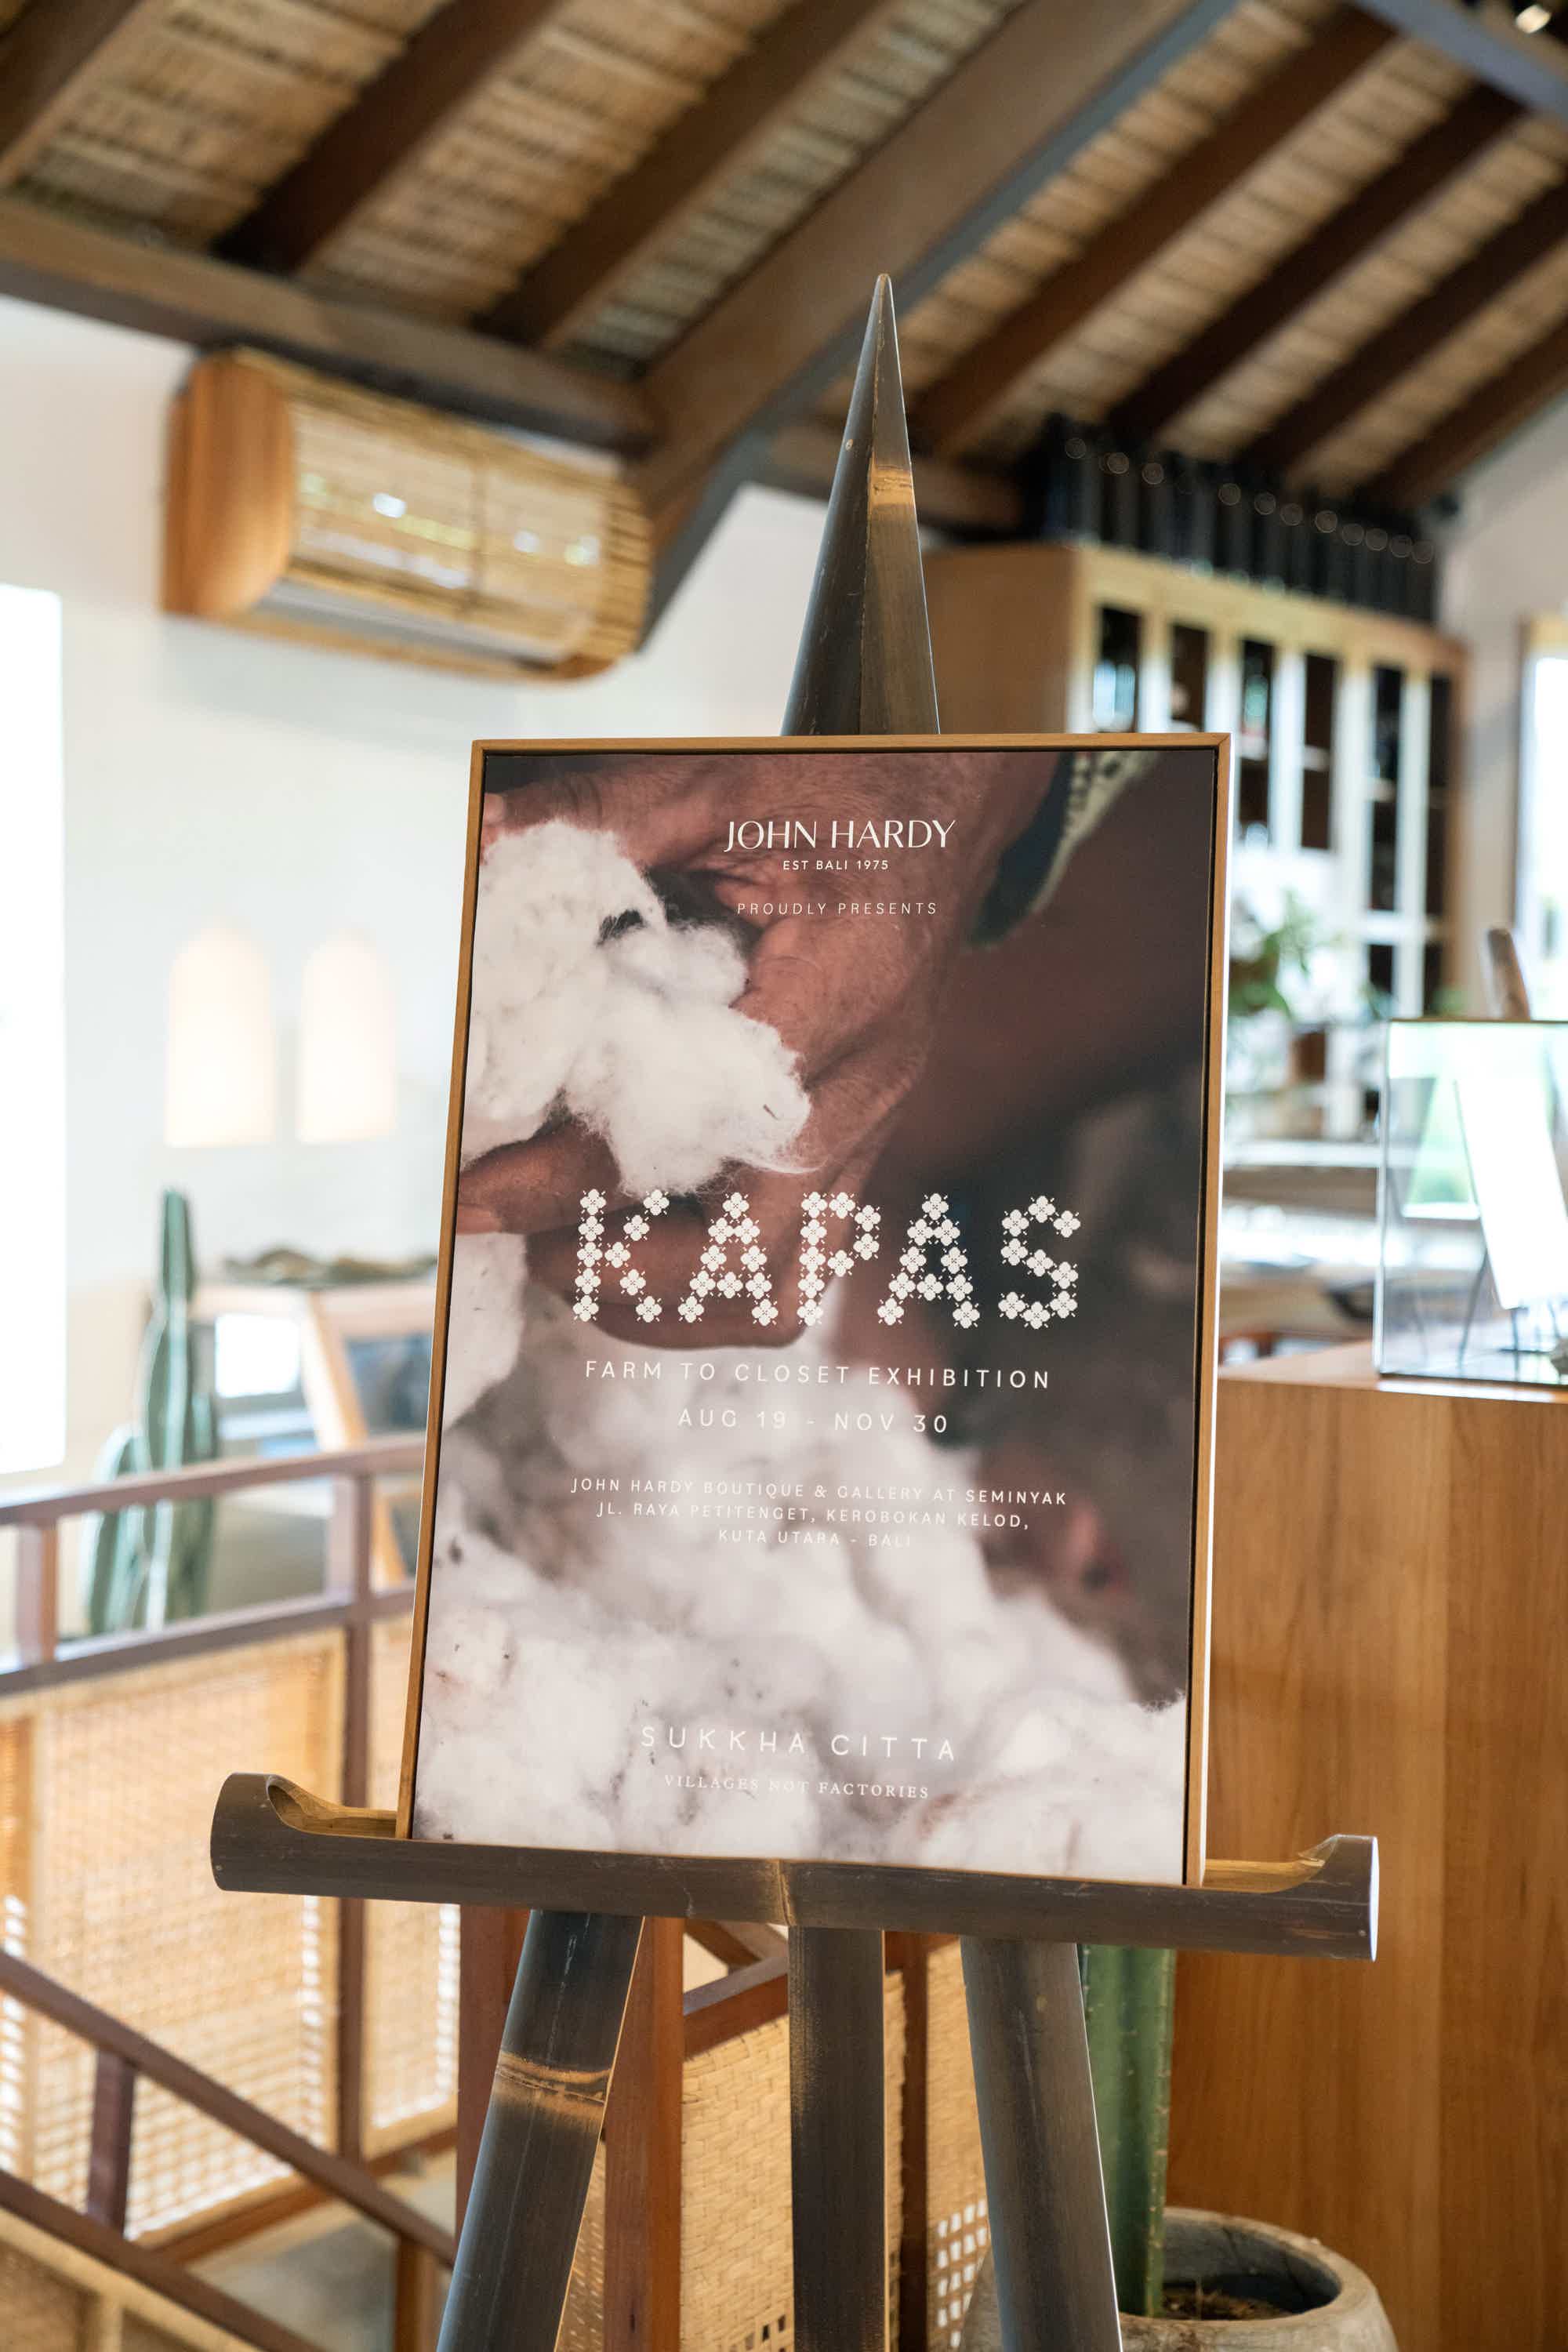 Poster of KAPAS Installation by SukkhaCitta in John Hardy Boutique & Gallery at Seminyak installed in an easel.